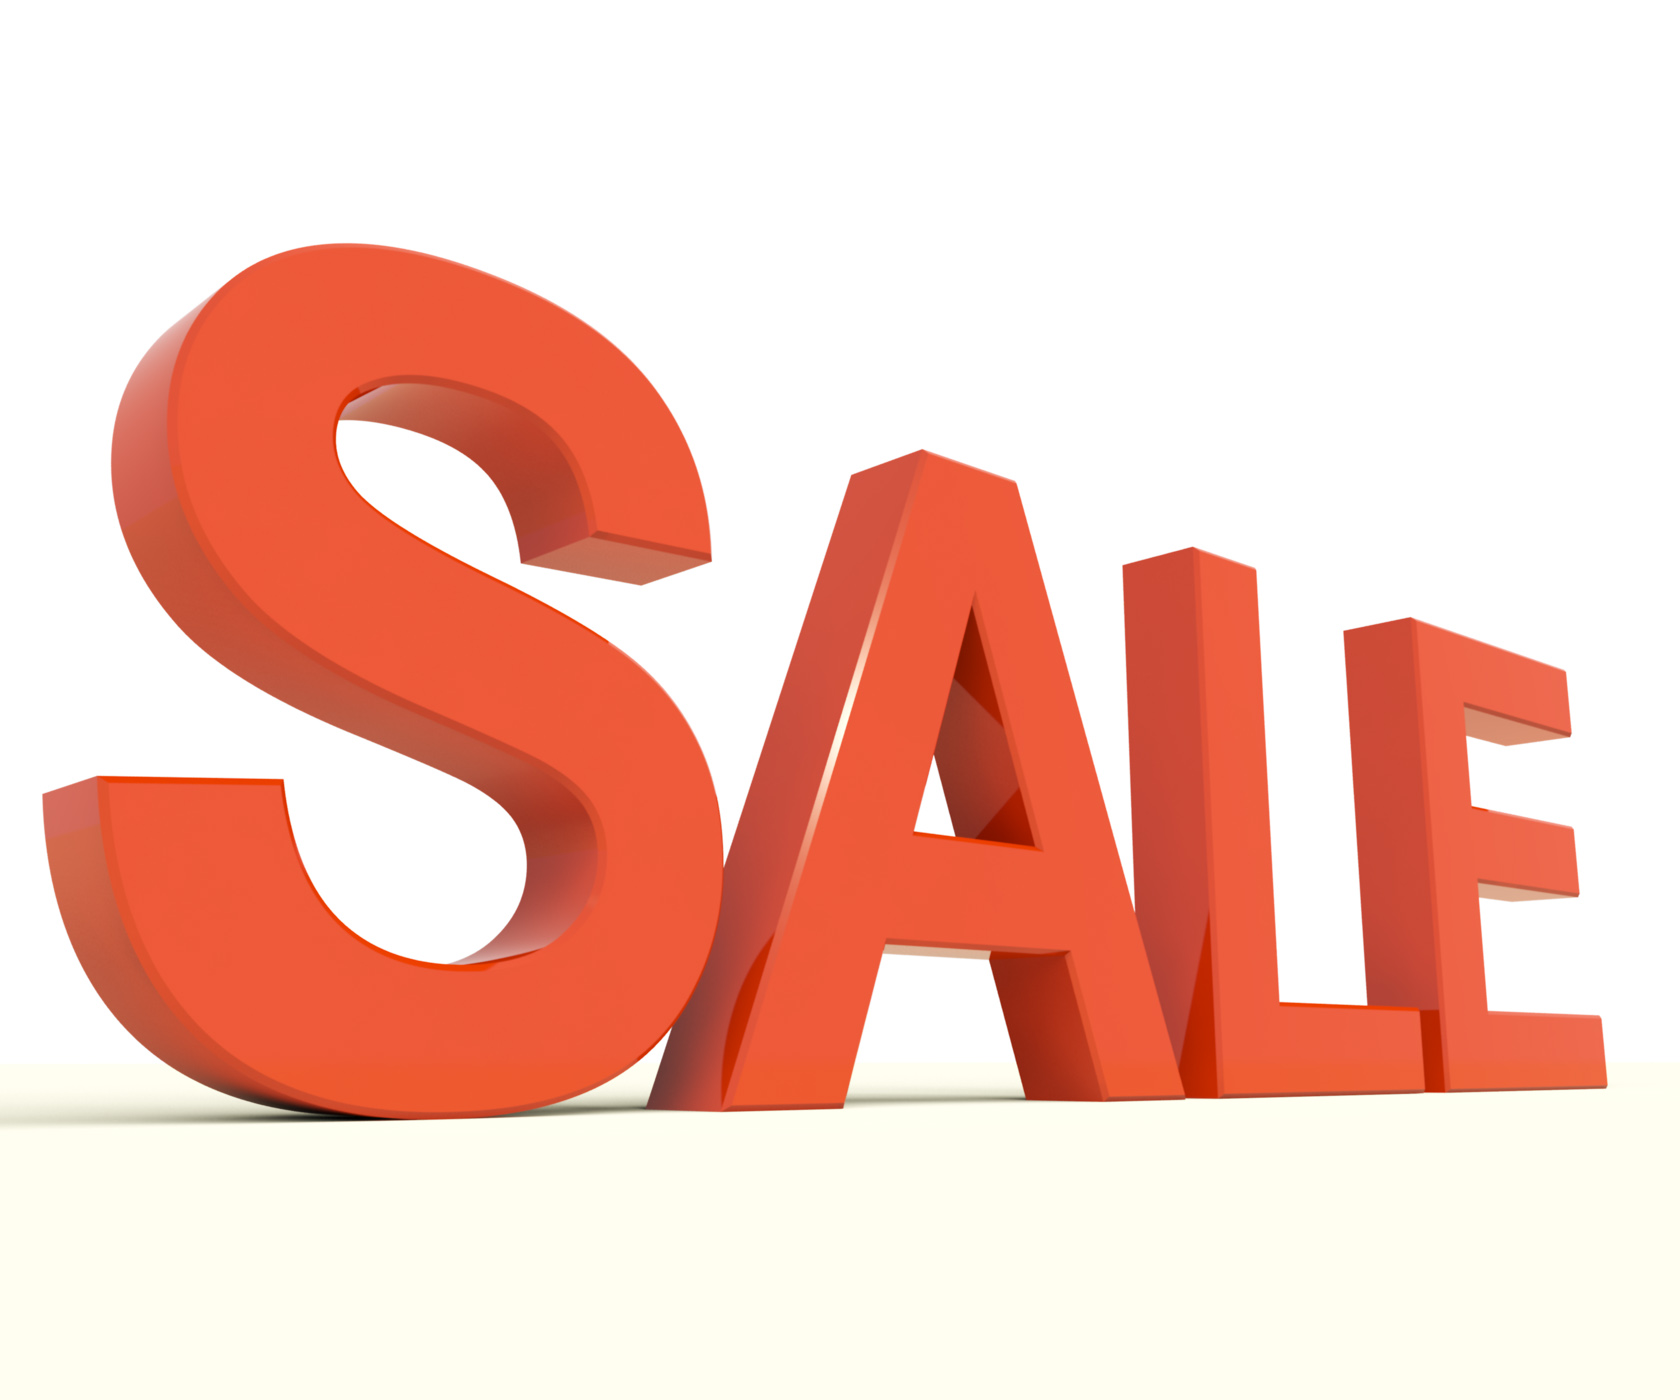 Sale Word As Symbol for Discount And Promotions, Business, Reduction, Store, Shopping, HQ Photo